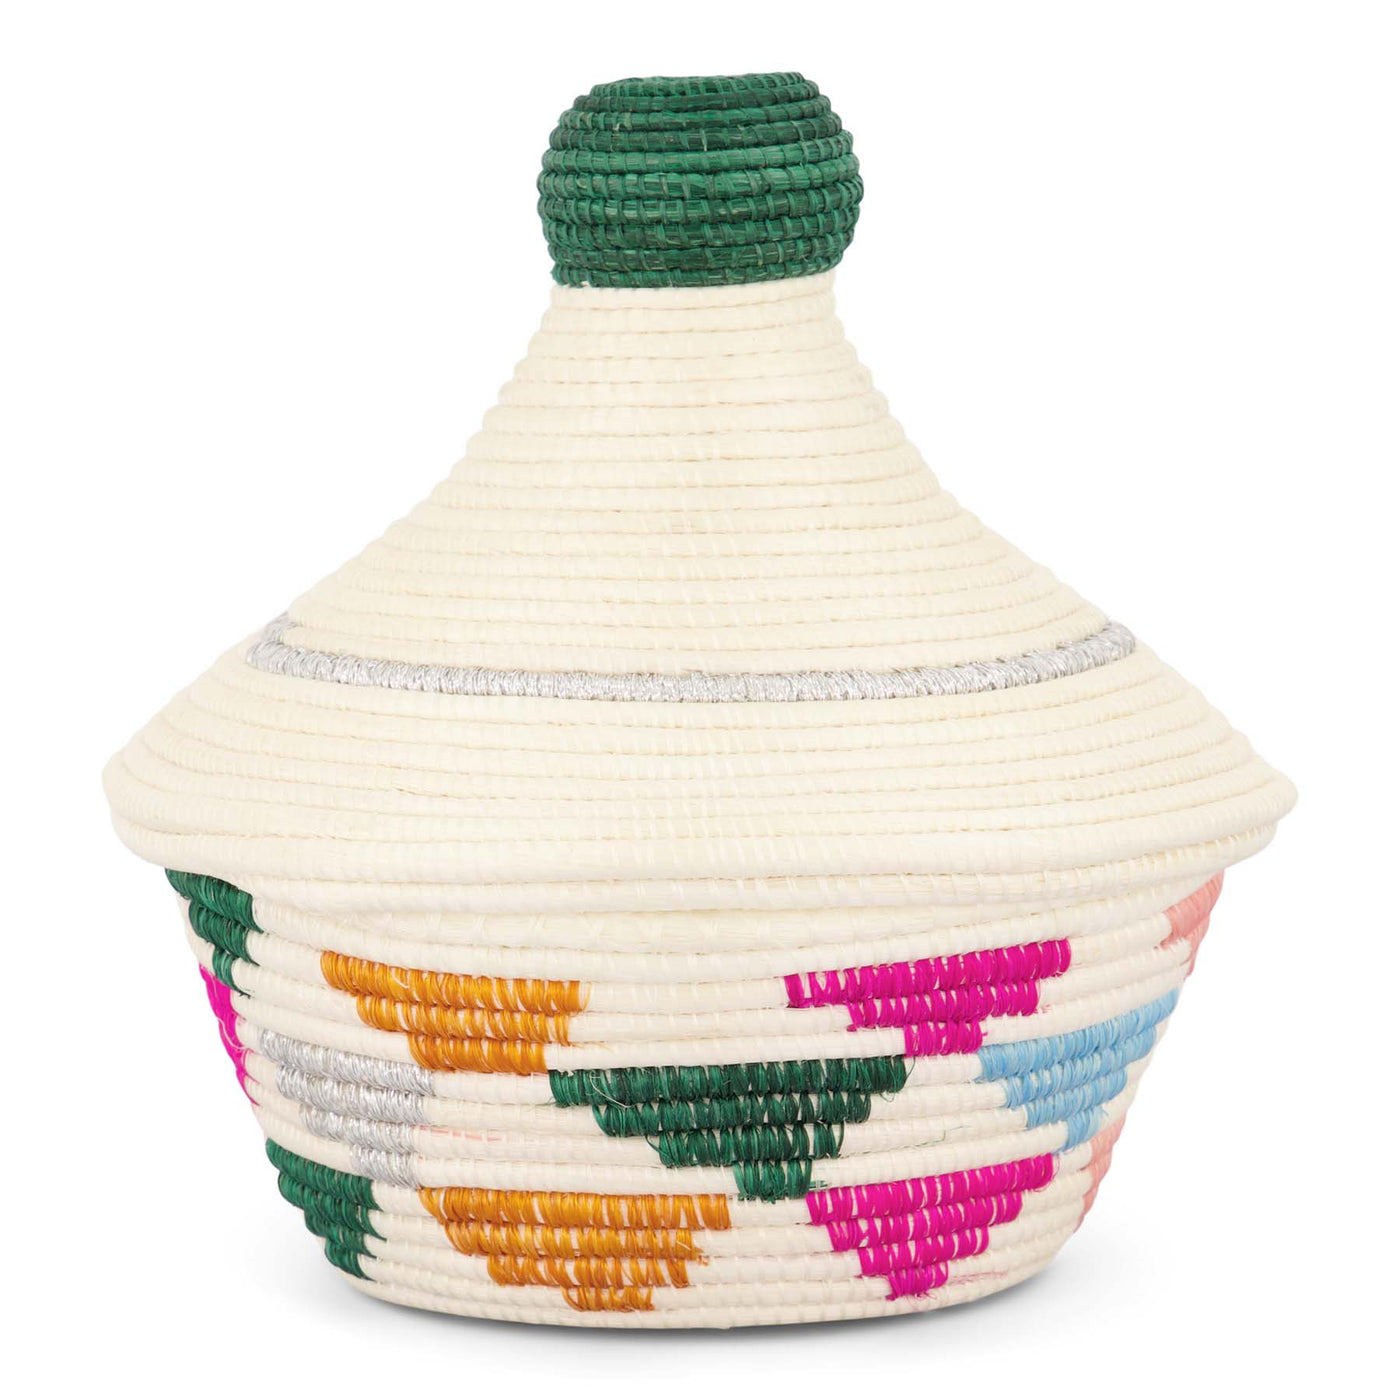 Holiday Lidded Box - 4.5" Colorful